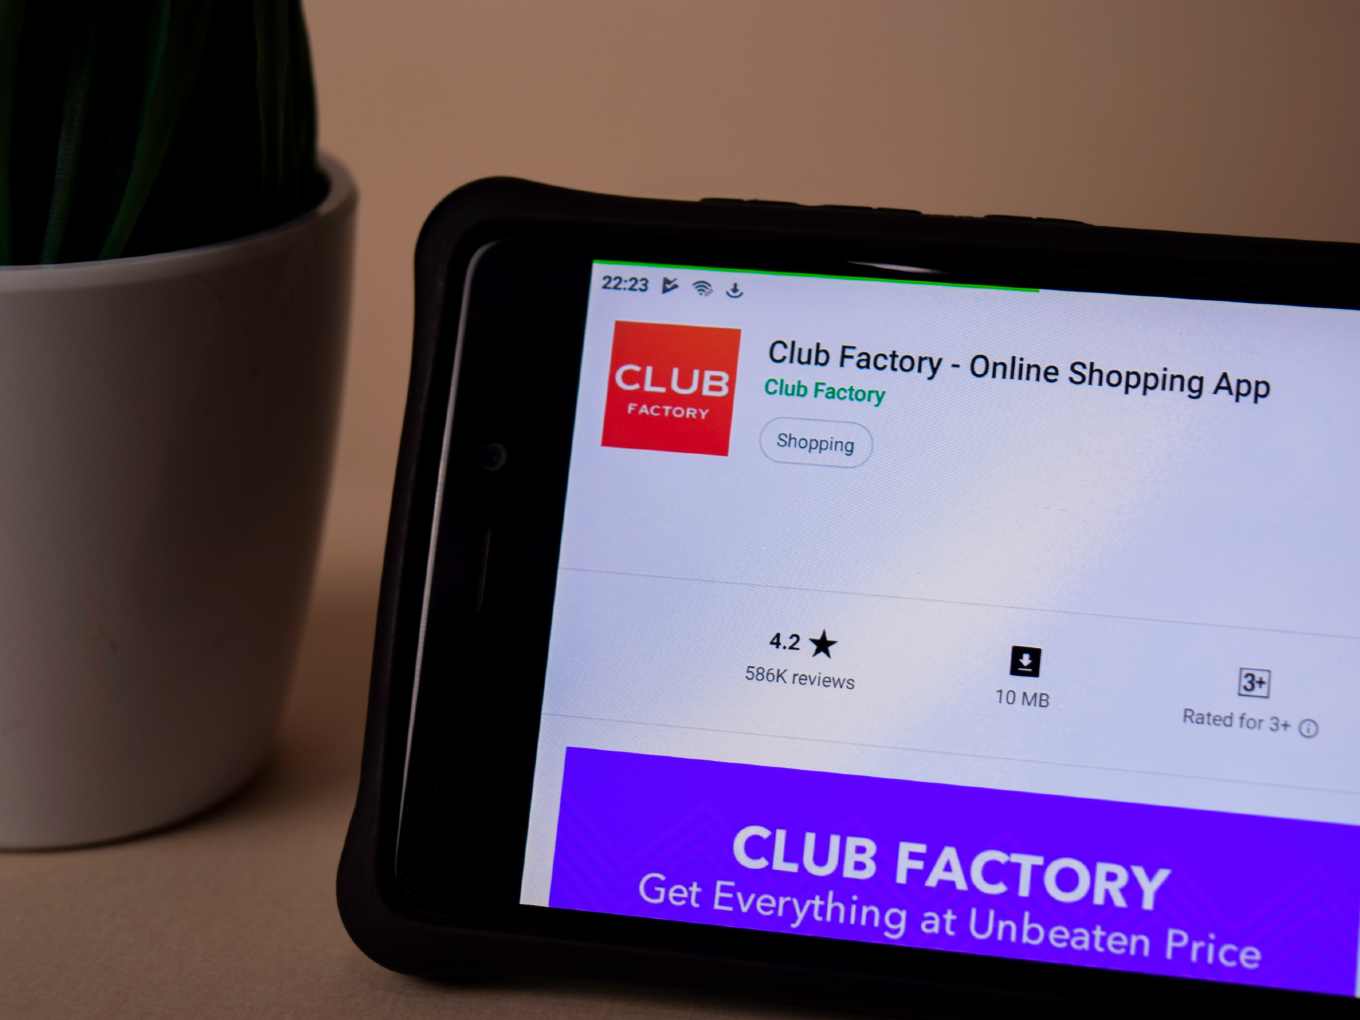 After Ban, Club Factory Suspends Payment To Sellers